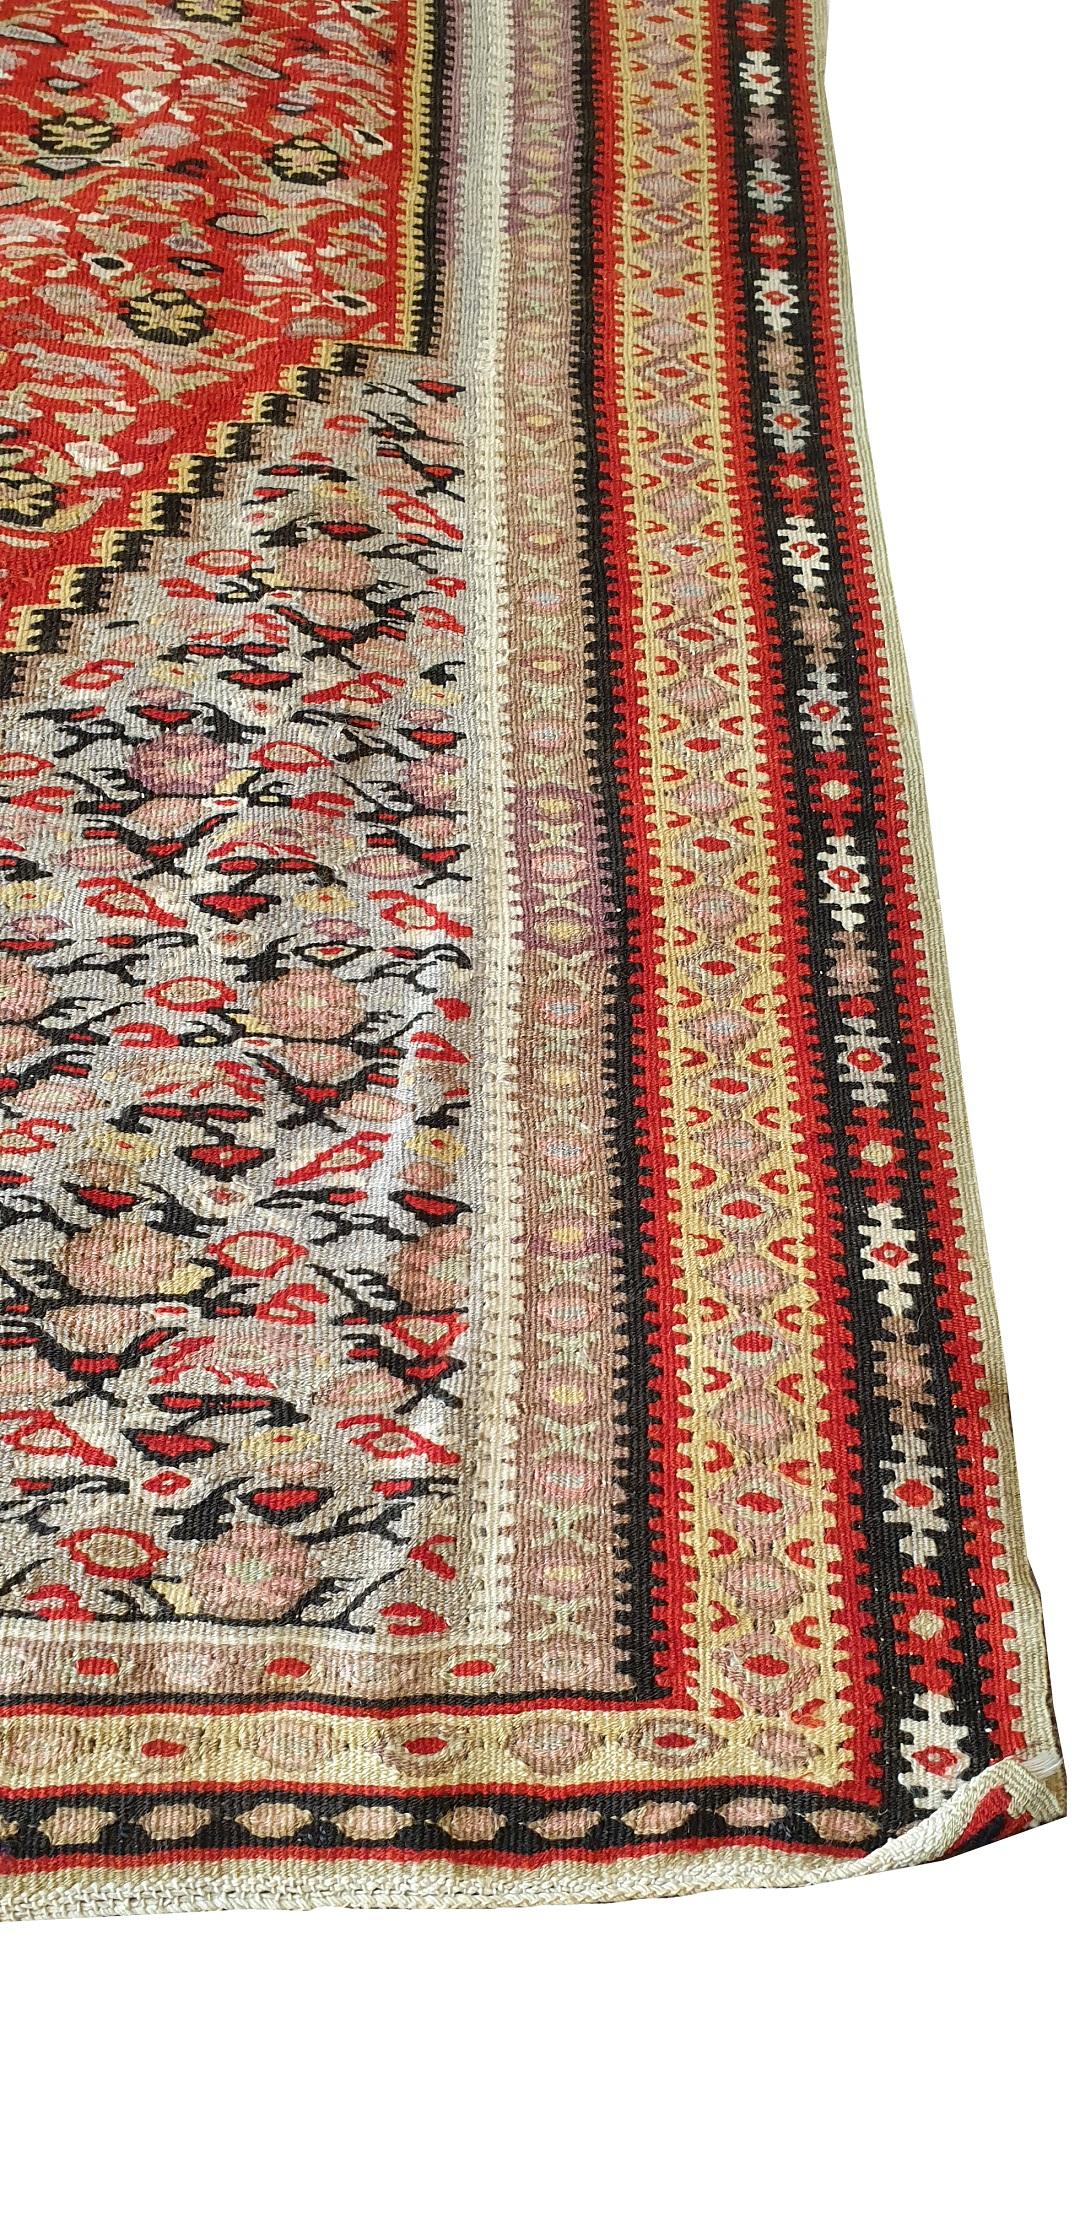 Hand-Woven 664 - Old Fine Senneh Kilim For Sale